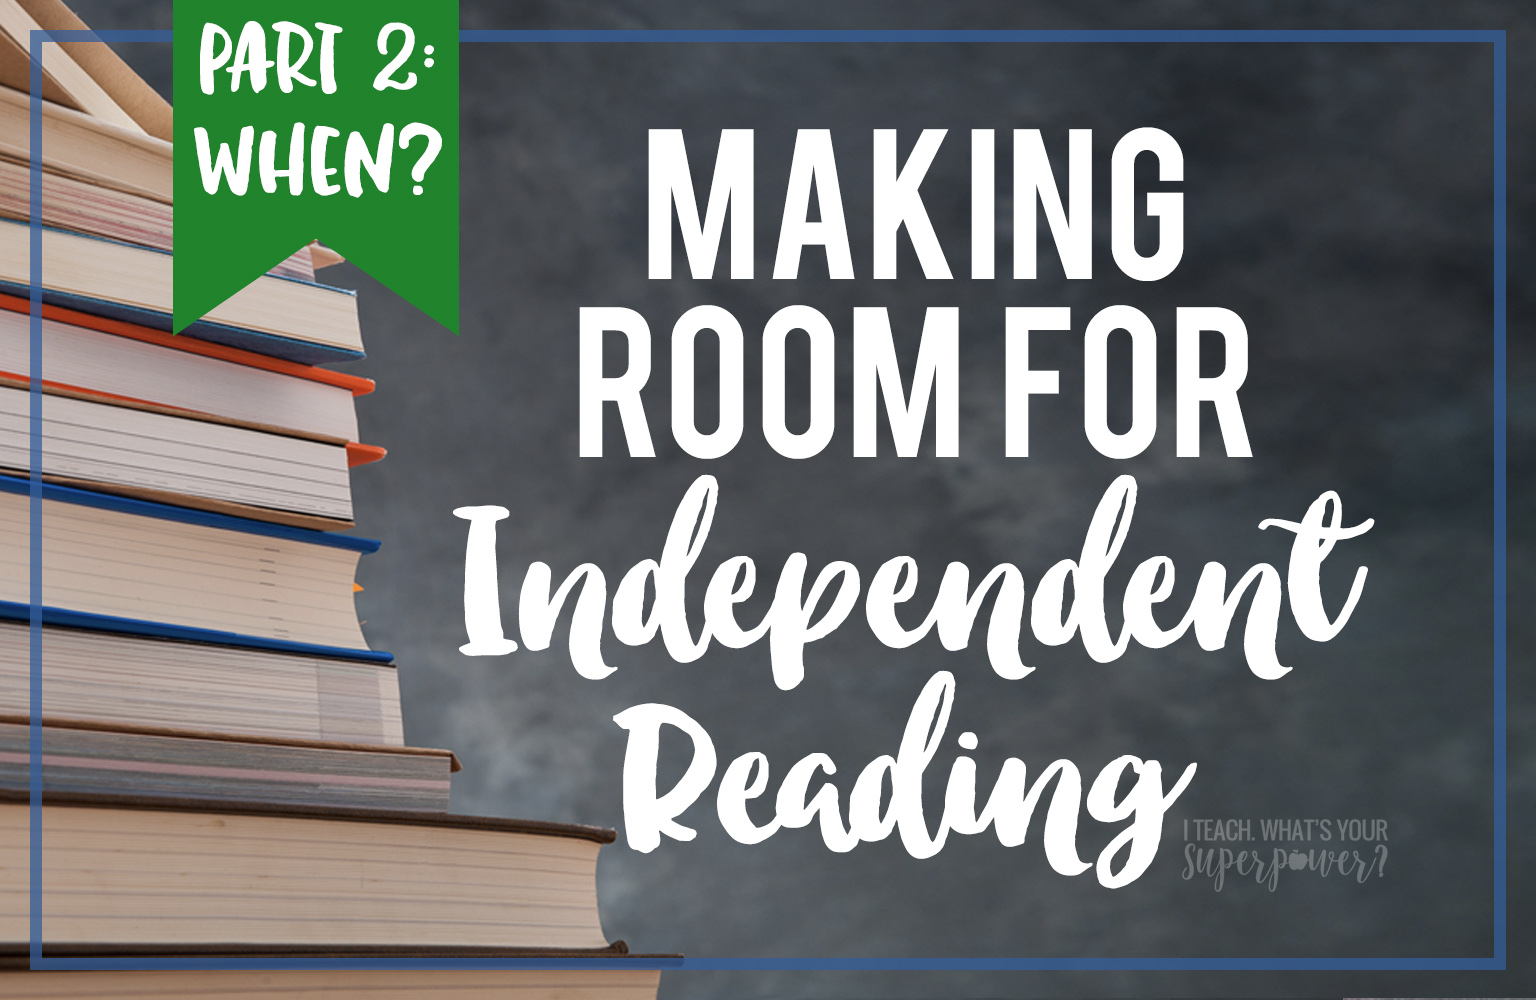 Making room for independent reading: how to find time to make room for the most important component of your literacy block.